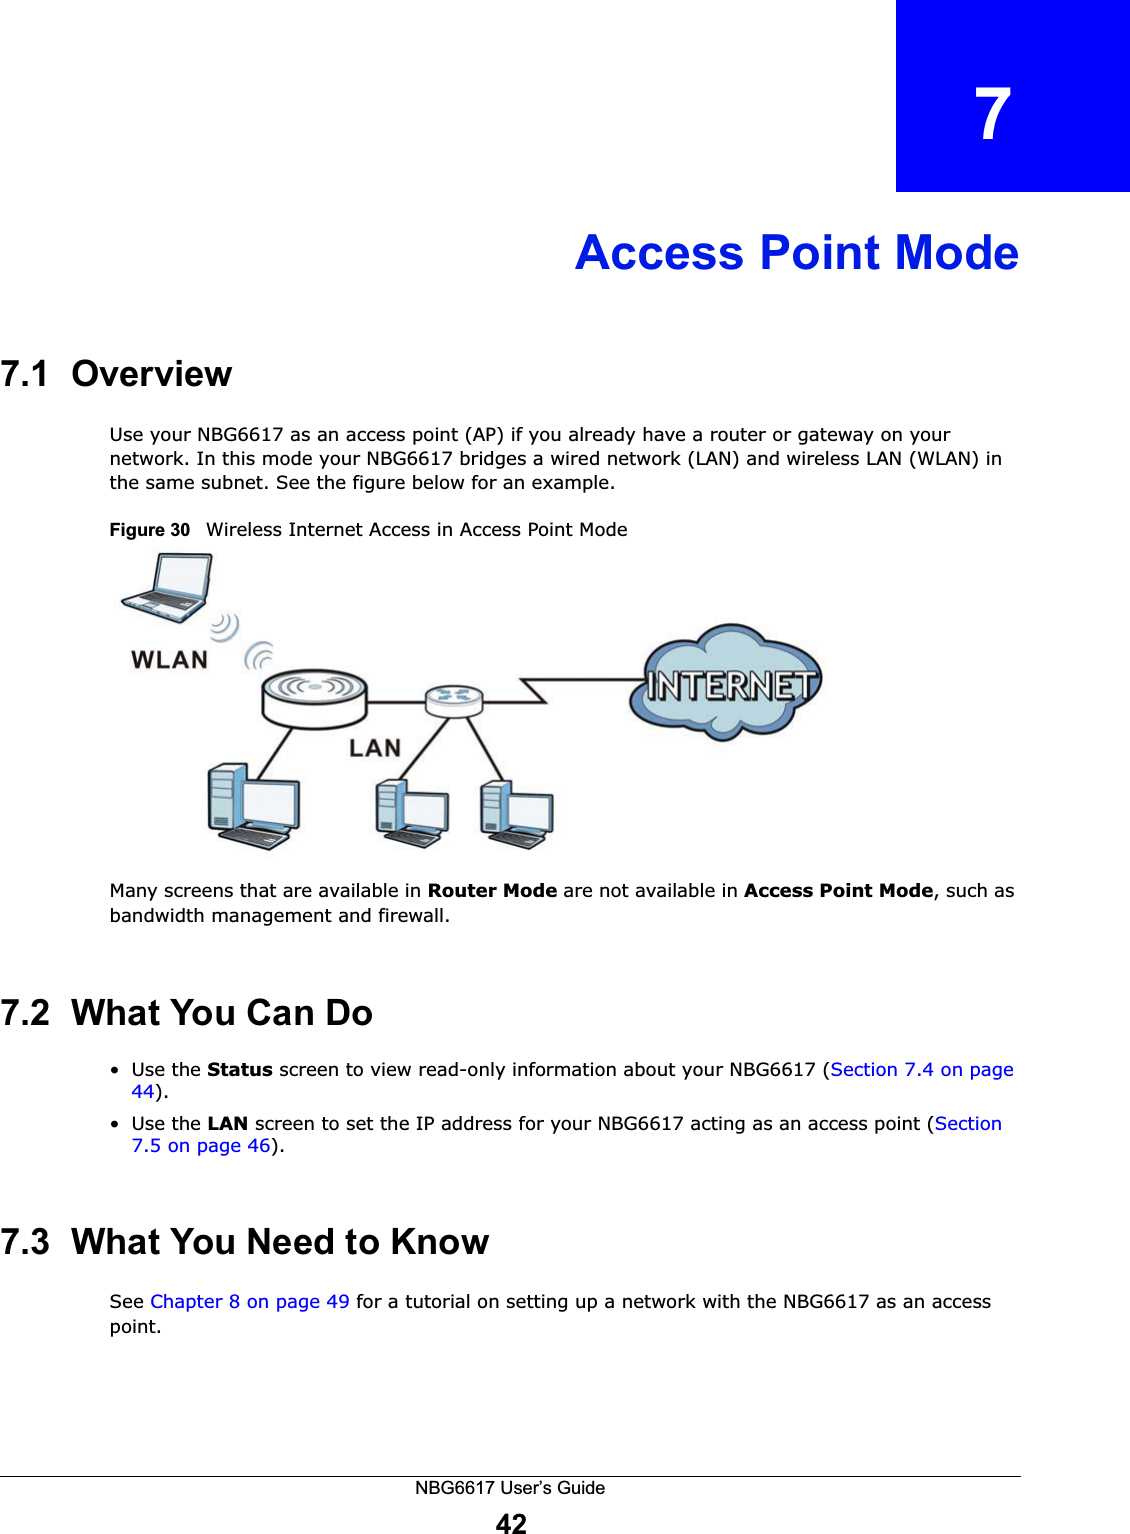 NBG6617 User’s Guide42CHAPTER   7Access Point Mode7.1  OverviewUse your NBG6617 as an access point (AP) if you already have a router or gateway on your network. In this mode your NBG6617 bridges a wired network (LAN) and wireless LAN (WLAN) in the same subnet. See the figure below for an example.Figure 30   Wireless Internet Access in Access Point Mode Many screens that are available in Router Mode are not available in Access Point Mode, such as bandwidth management and firewall.7.2  What You Can Do•Use the Status screen to view read-only information about your NBG6617 (Section 7.4 on page 44).•Use the LAN screen to set the IP address for your NBG6617 acting as an access point (Section 7.5 on page 46).7.3  What You Need to KnowSee Chapter 8 on page 49 for a tutorial on setting up a network with the NBG6617 as an access point.